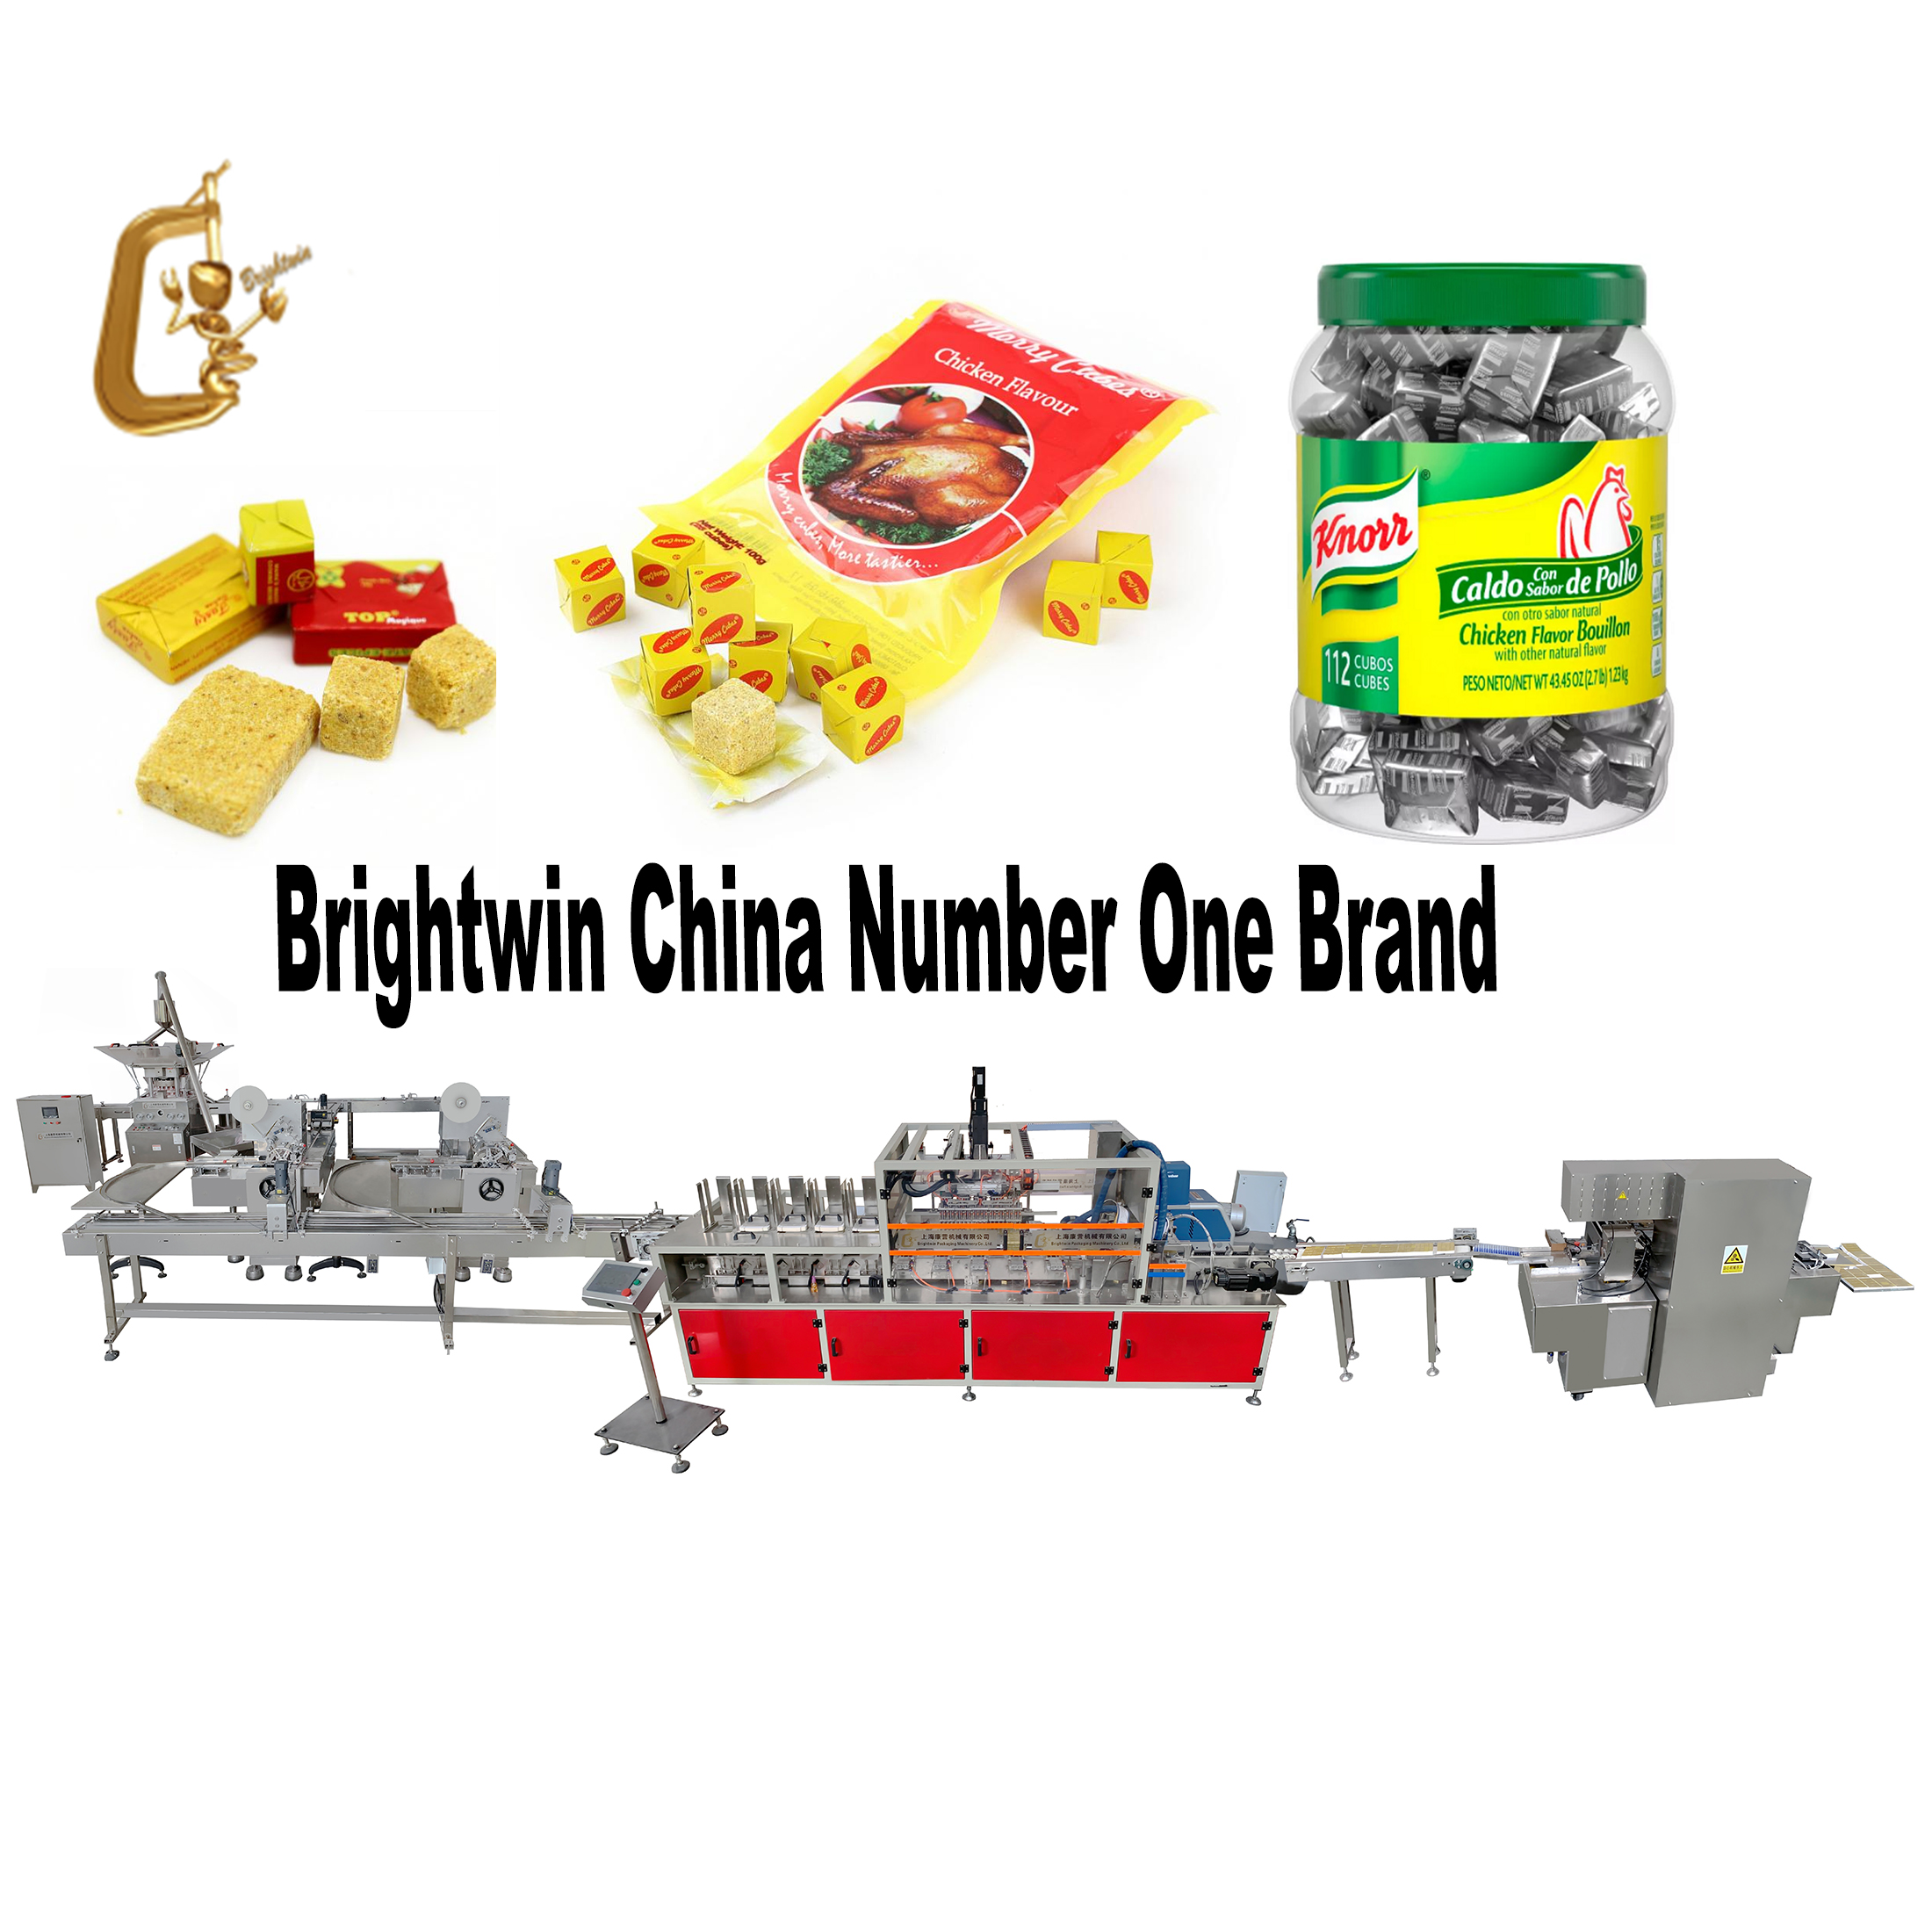 Brightwin Halal Chicken Cube Bouillon SOFT CHICKEN STOCK seasoning CUBE Manufacturing equipment making packing machine Featured Image